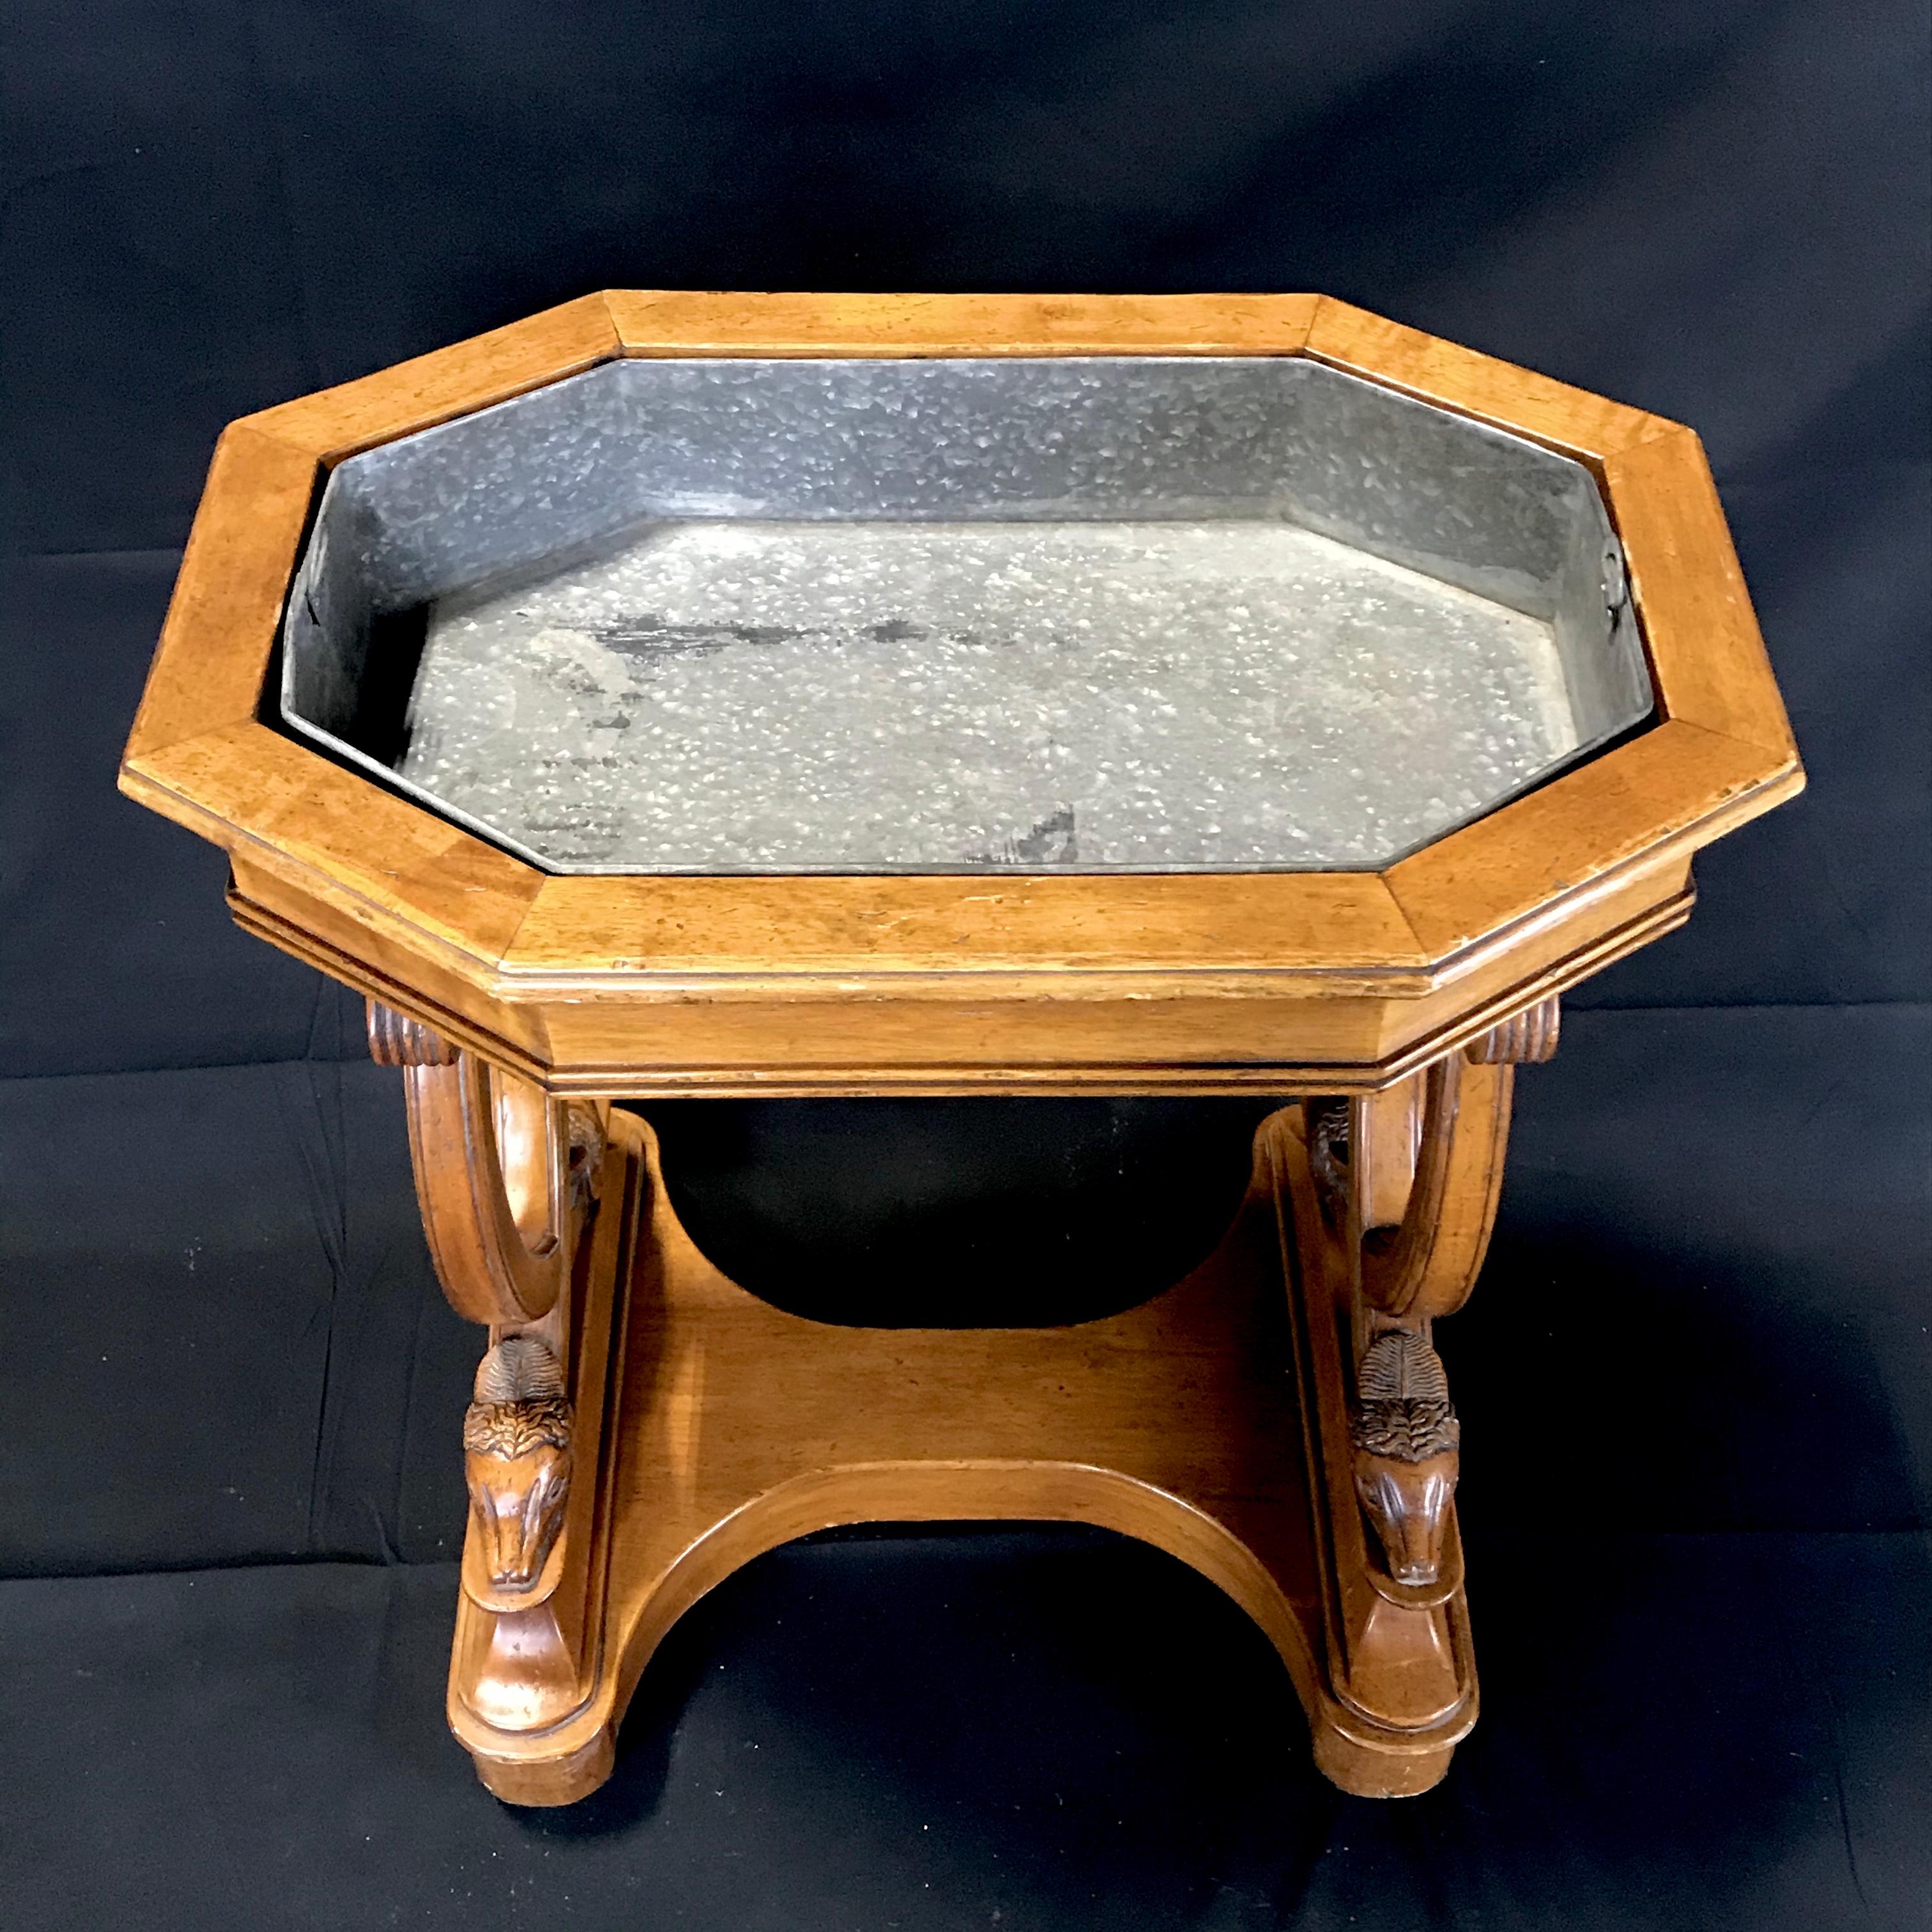 A late 19th century free standing French carved walnut planter table with incredible sheepshead figural feet. The removable zinc planter tray is inset into a boxed walnut top which tapers down to a decorative base highlighting the four exquisitely